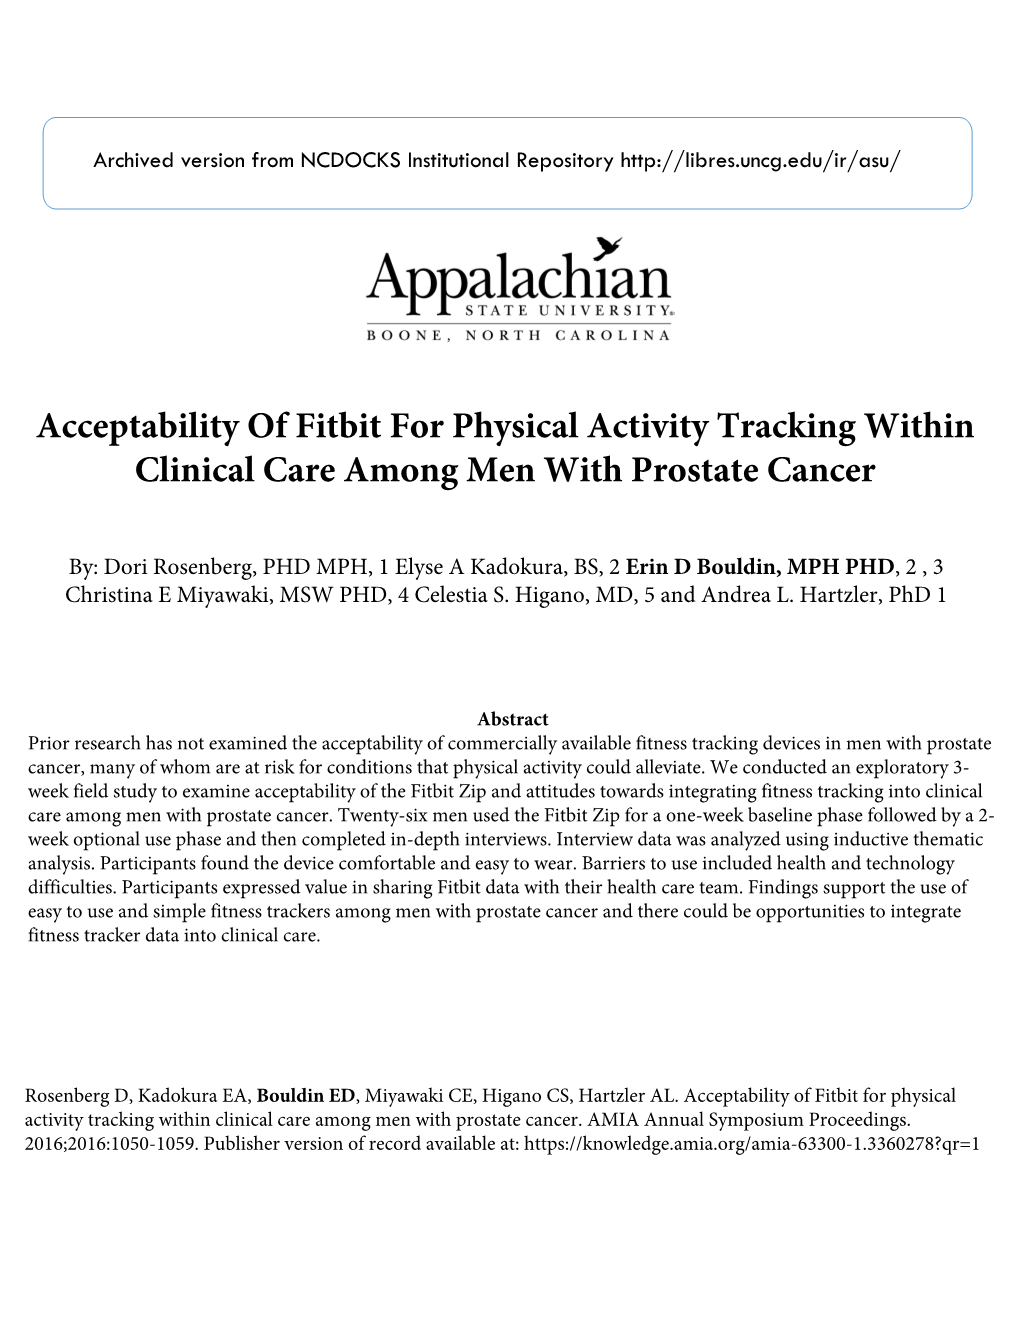 Acceptability of Fitbit for Physical Activity Tracking Within Clinical Care Among Men with Prostate Cancer